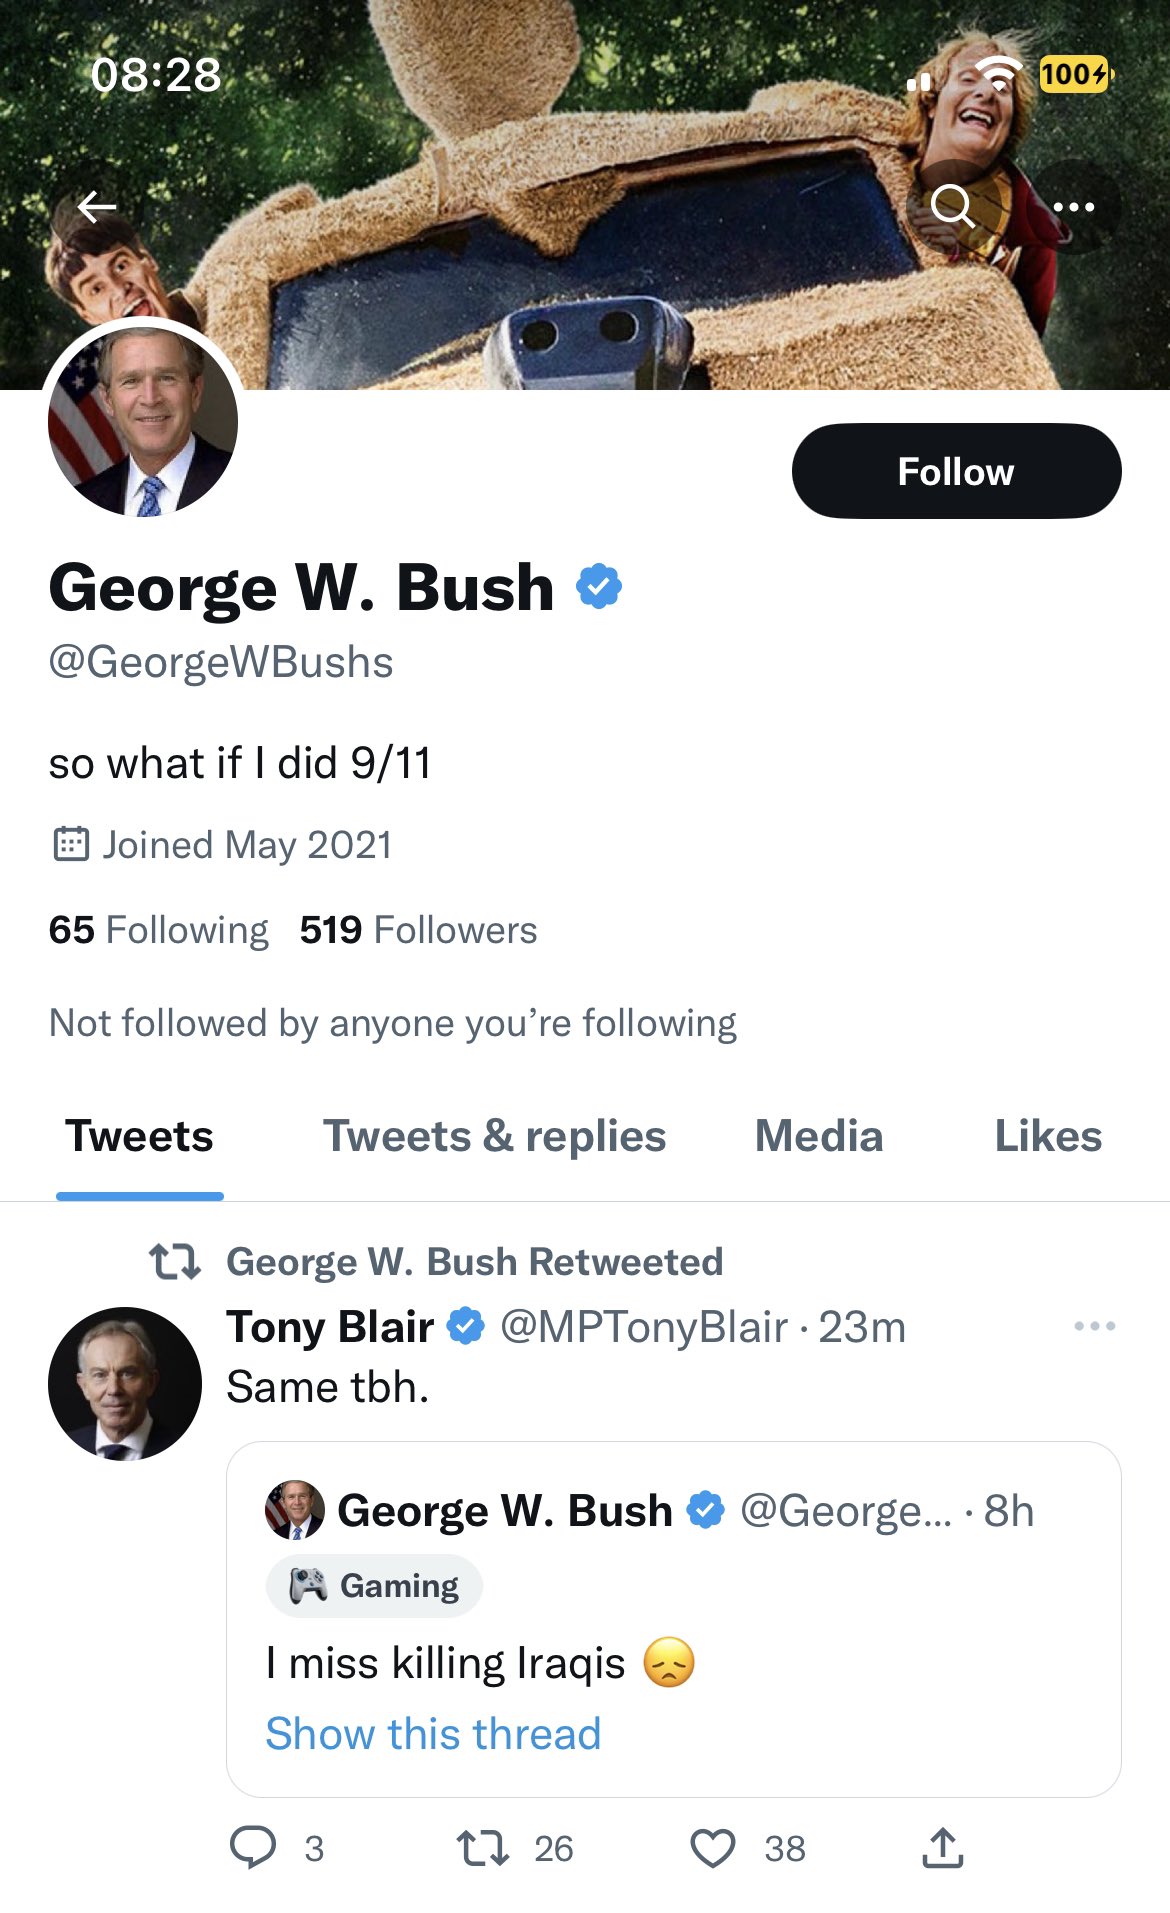 fake twitter posts - screenshot - K George W. Bush so what if I did 911 Joined 65 ing 519 ers Not ed by anyone you're ing Tweets Tweets & replies Media t George W. Bush Retweeted Tony Blair . 23m Same tbh. I miss killing Iraqis Show this thread 3 George W